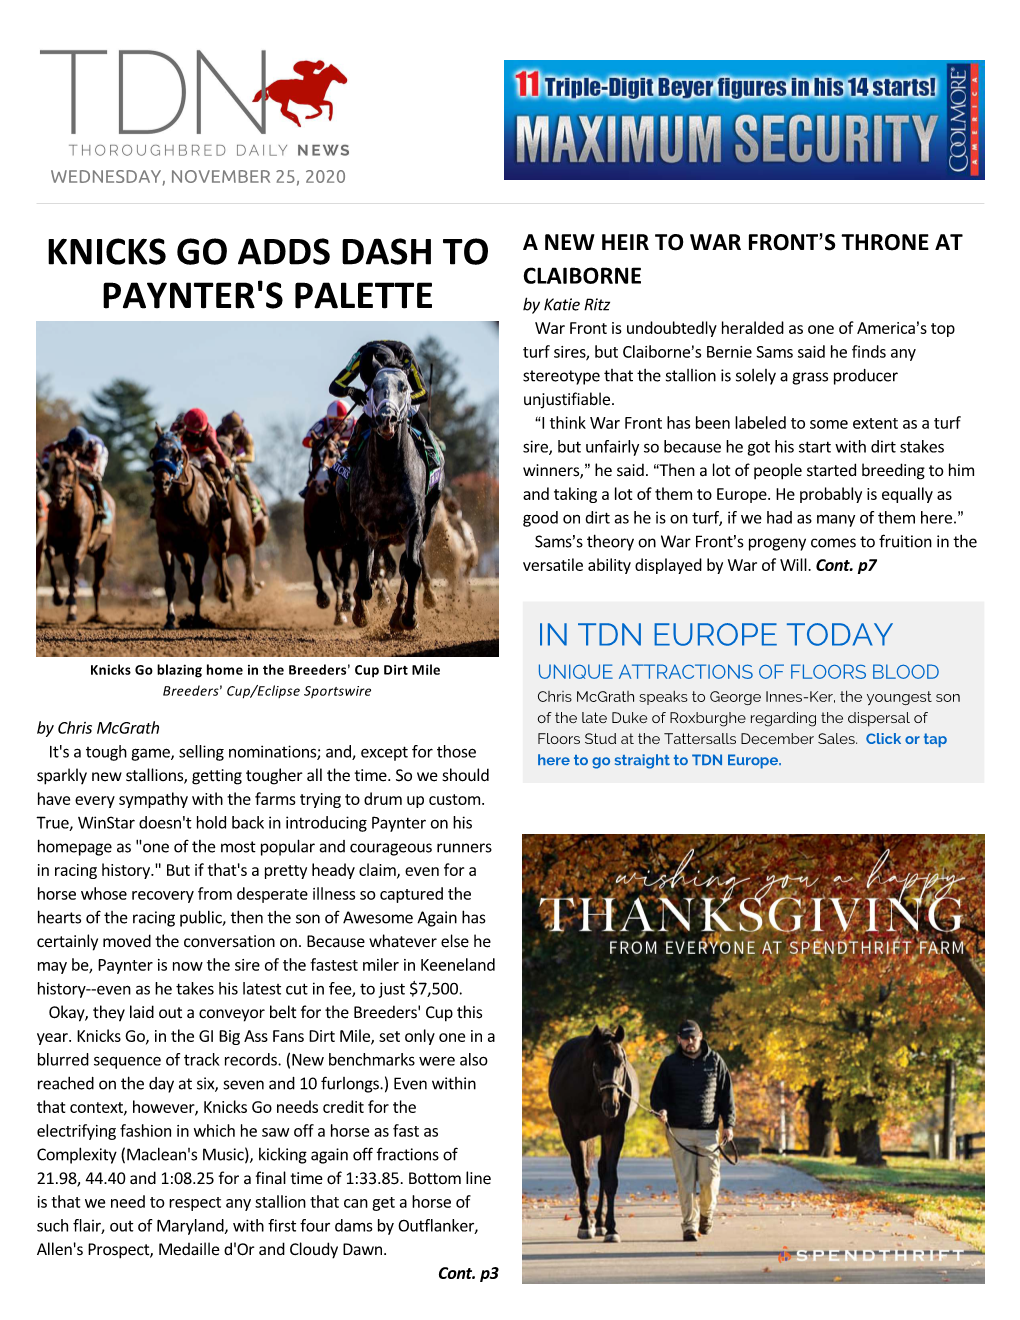 Knicks Go Adds Dash to Paynter's Palette